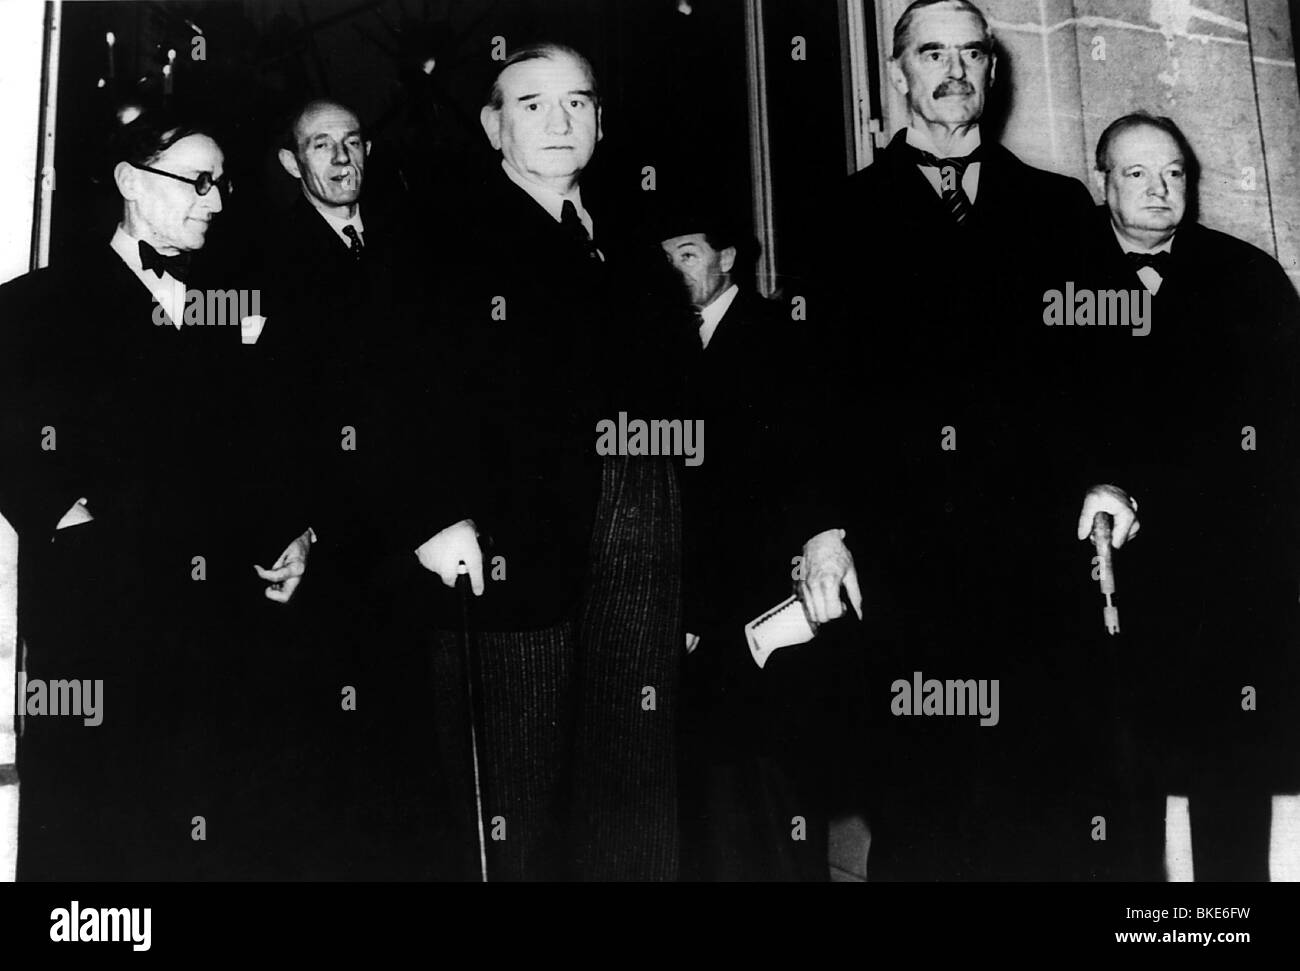 Chamberlain, Arthur Neville, 18.3.1869 - 9.11.1940, British politician, full length, during a meeting of the Allied Supreme War Council, February 1940, with Lord Halifax, Winston Churchill and Edouard Daladier, Stock Photo